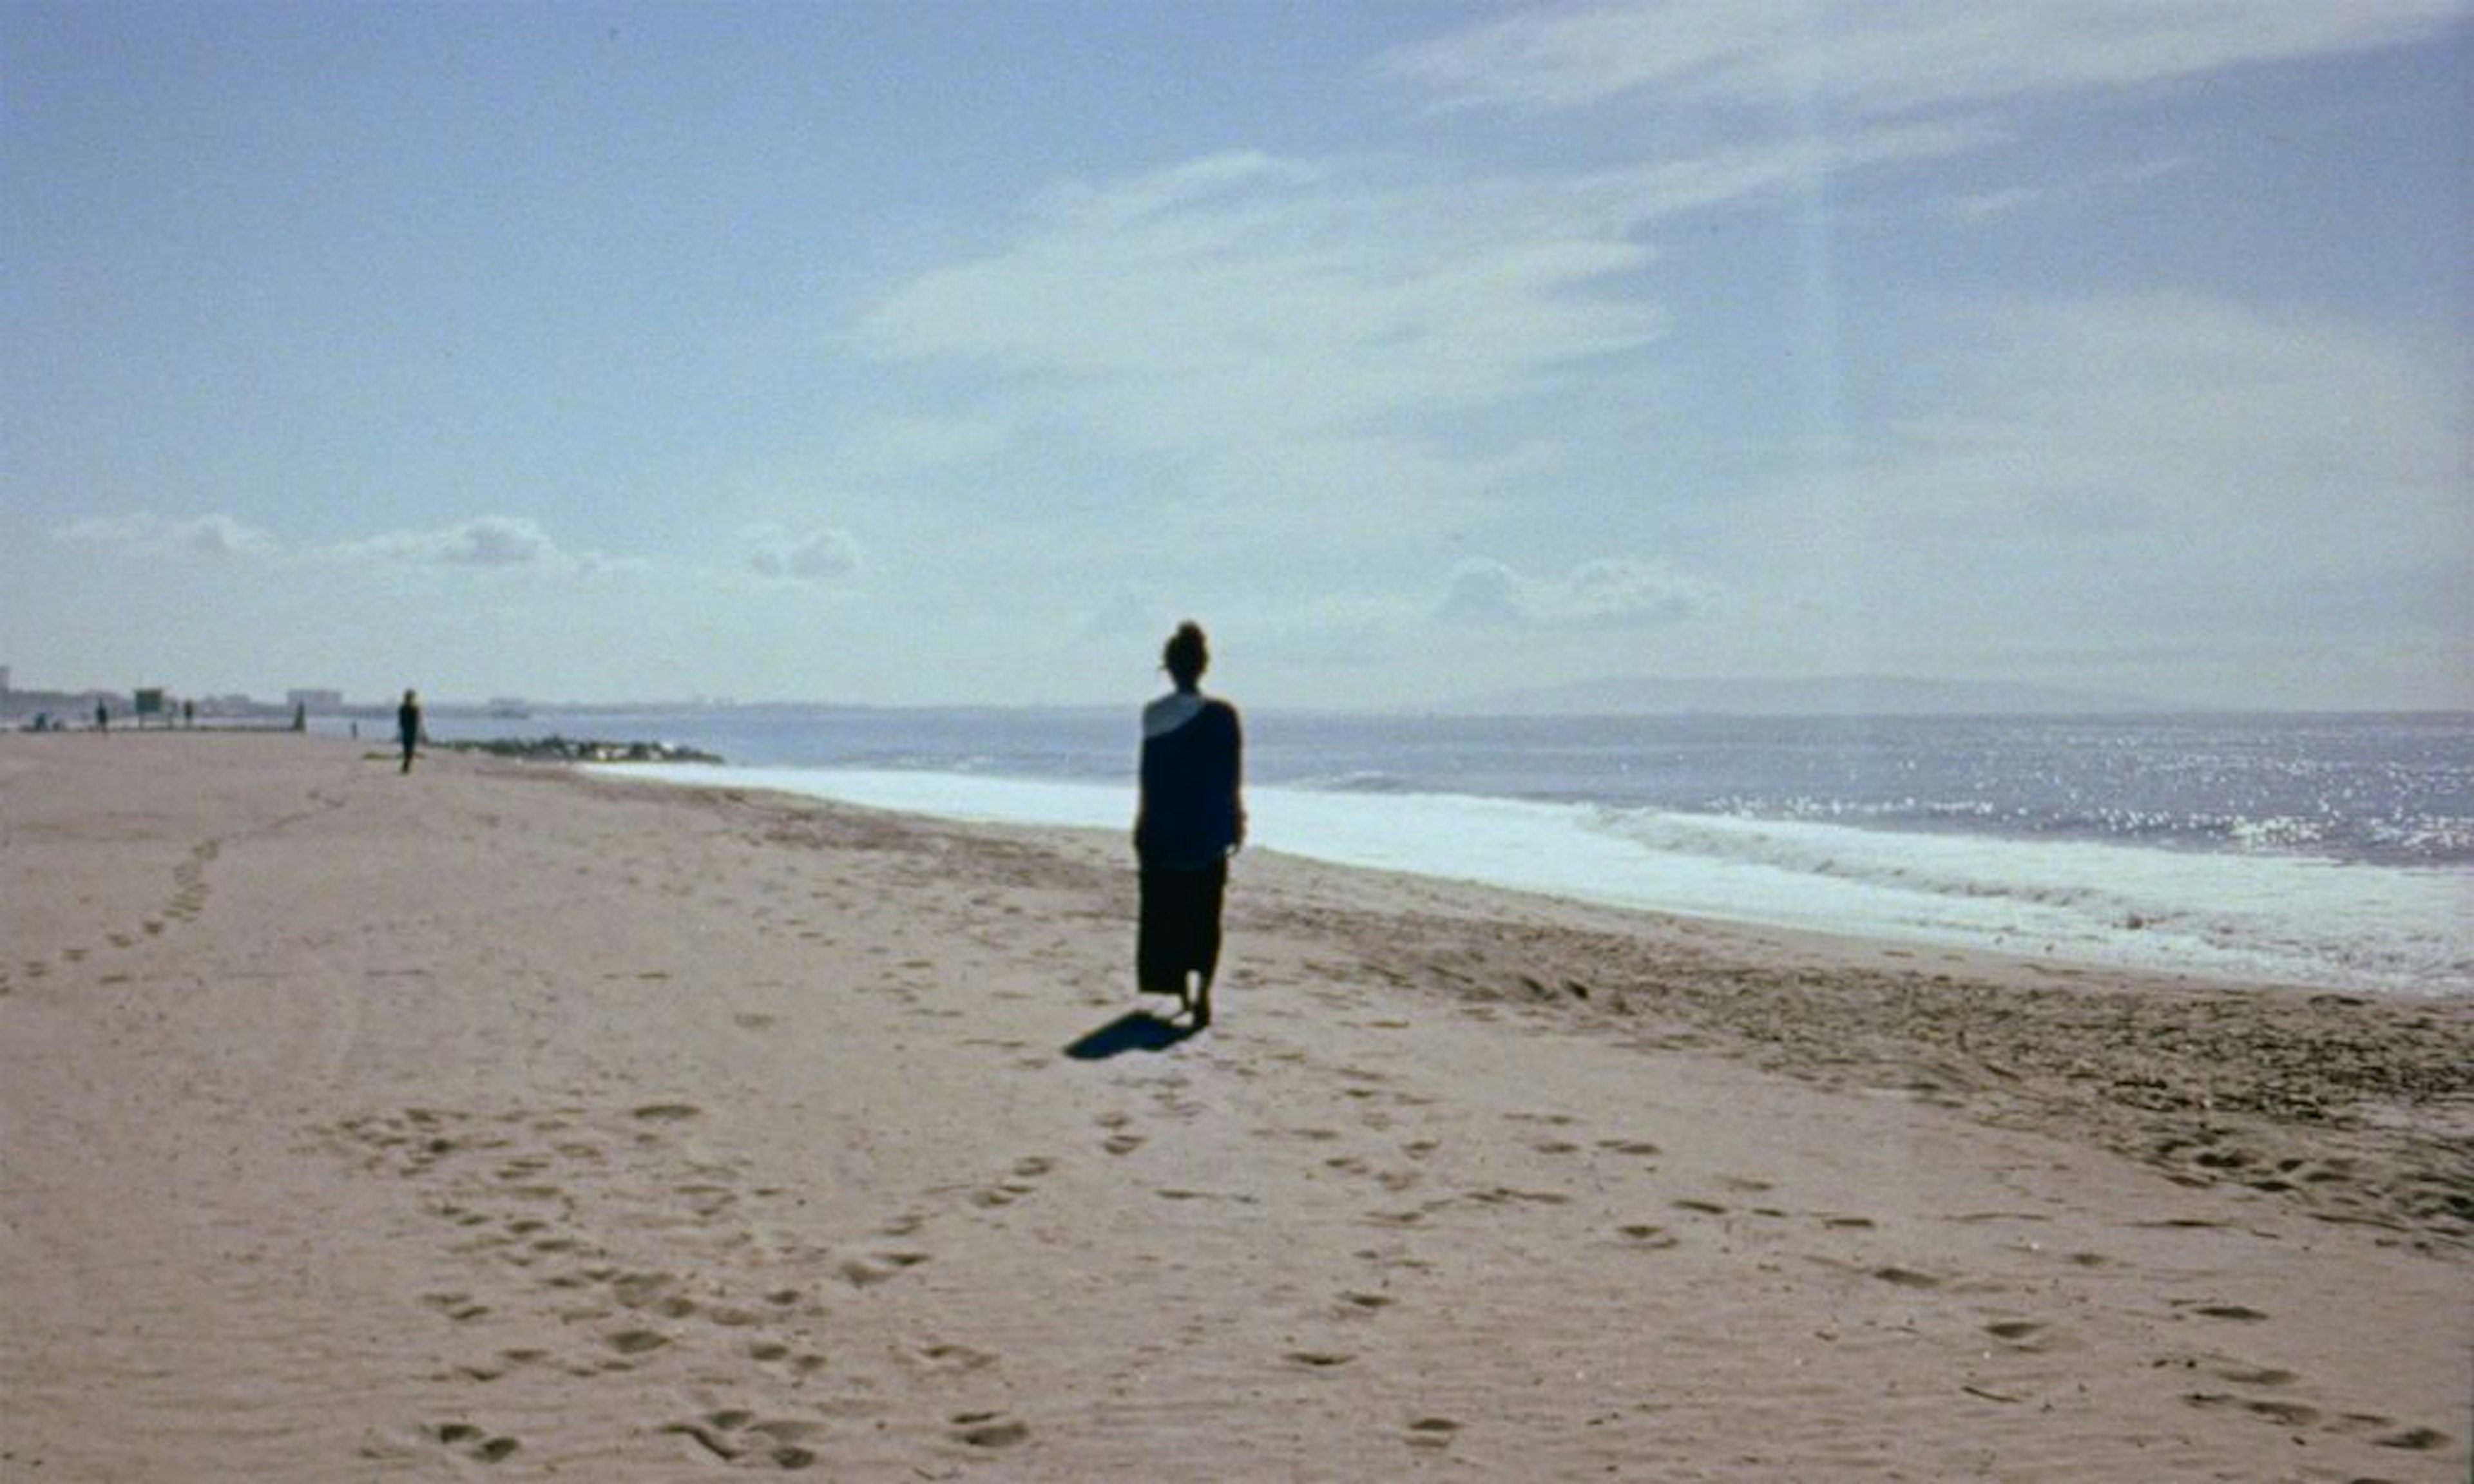 Landscape of a shoreline on a blue sunny day, footsteps visible in the sand and a figure whose back is turned toward the viewer. 